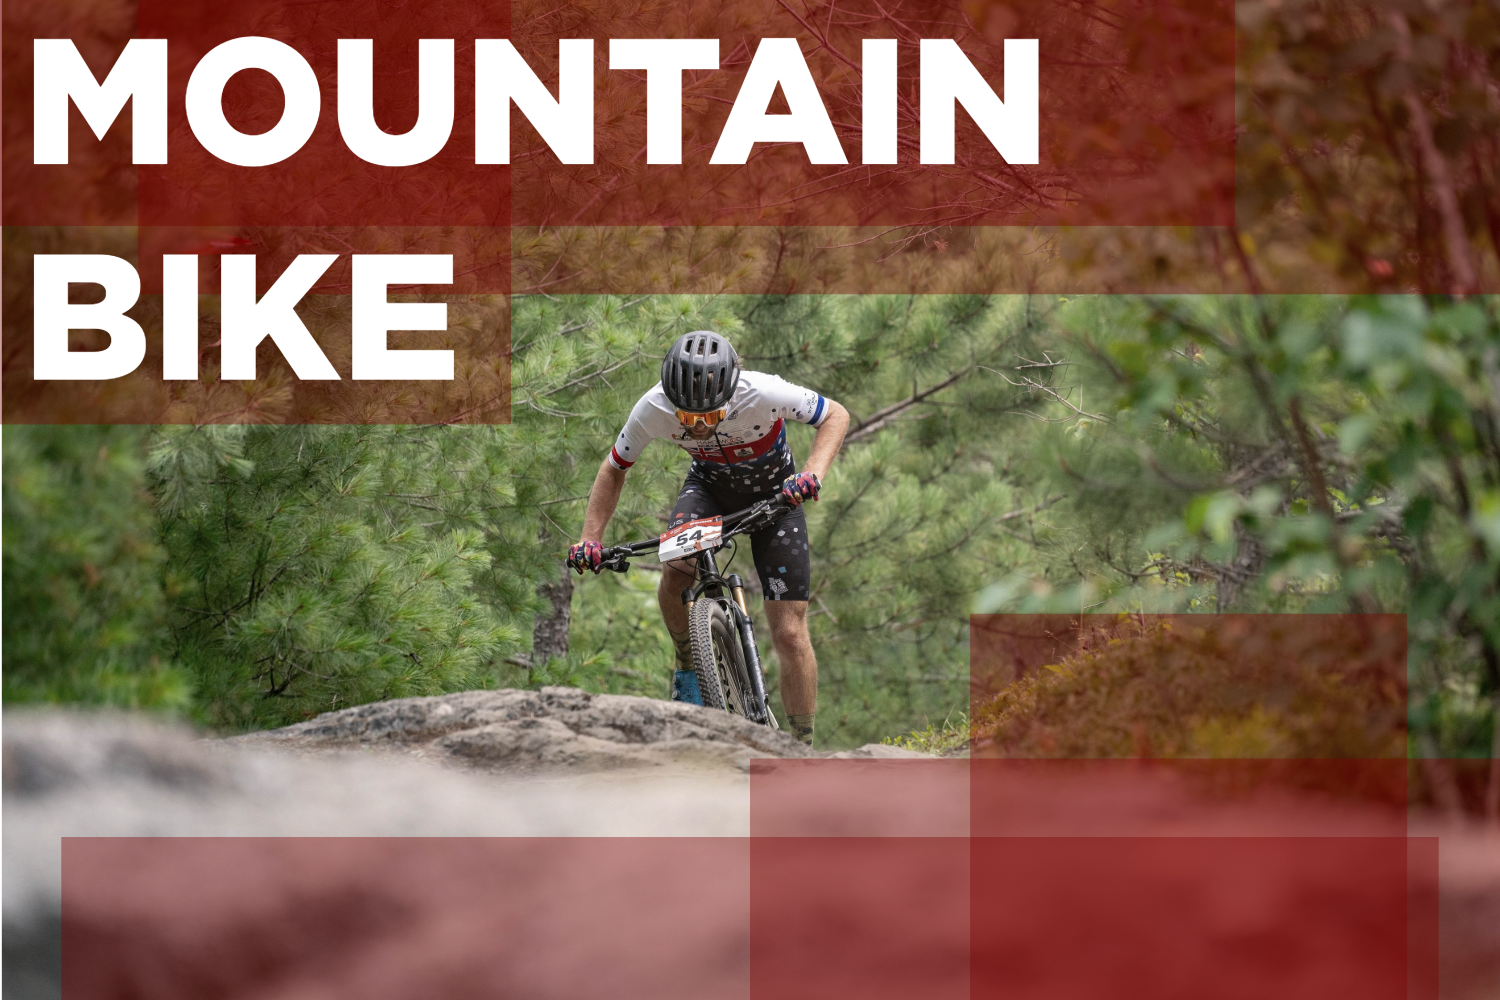 Rider cresting rocky terrain with pine tree background. Graphic reads Mountain Bike